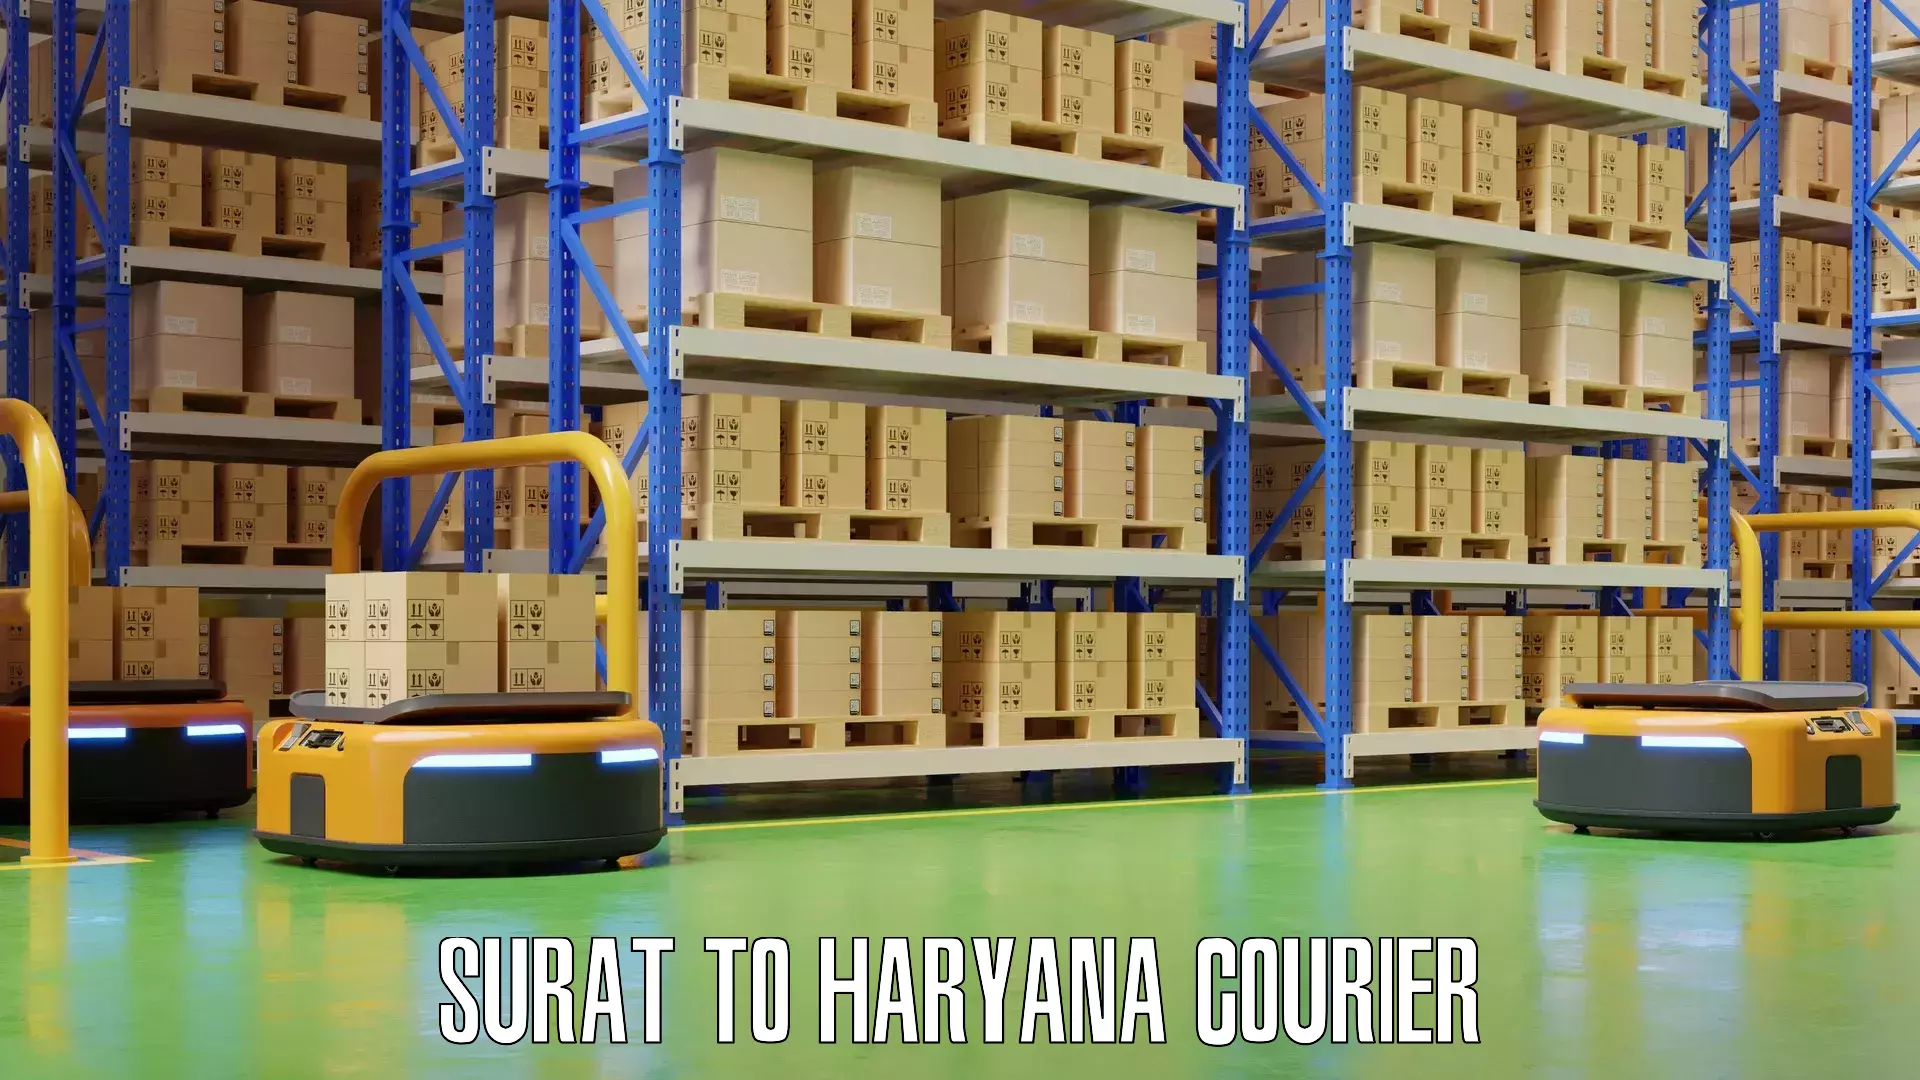 Luggage shipment specialists Surat to Haryana